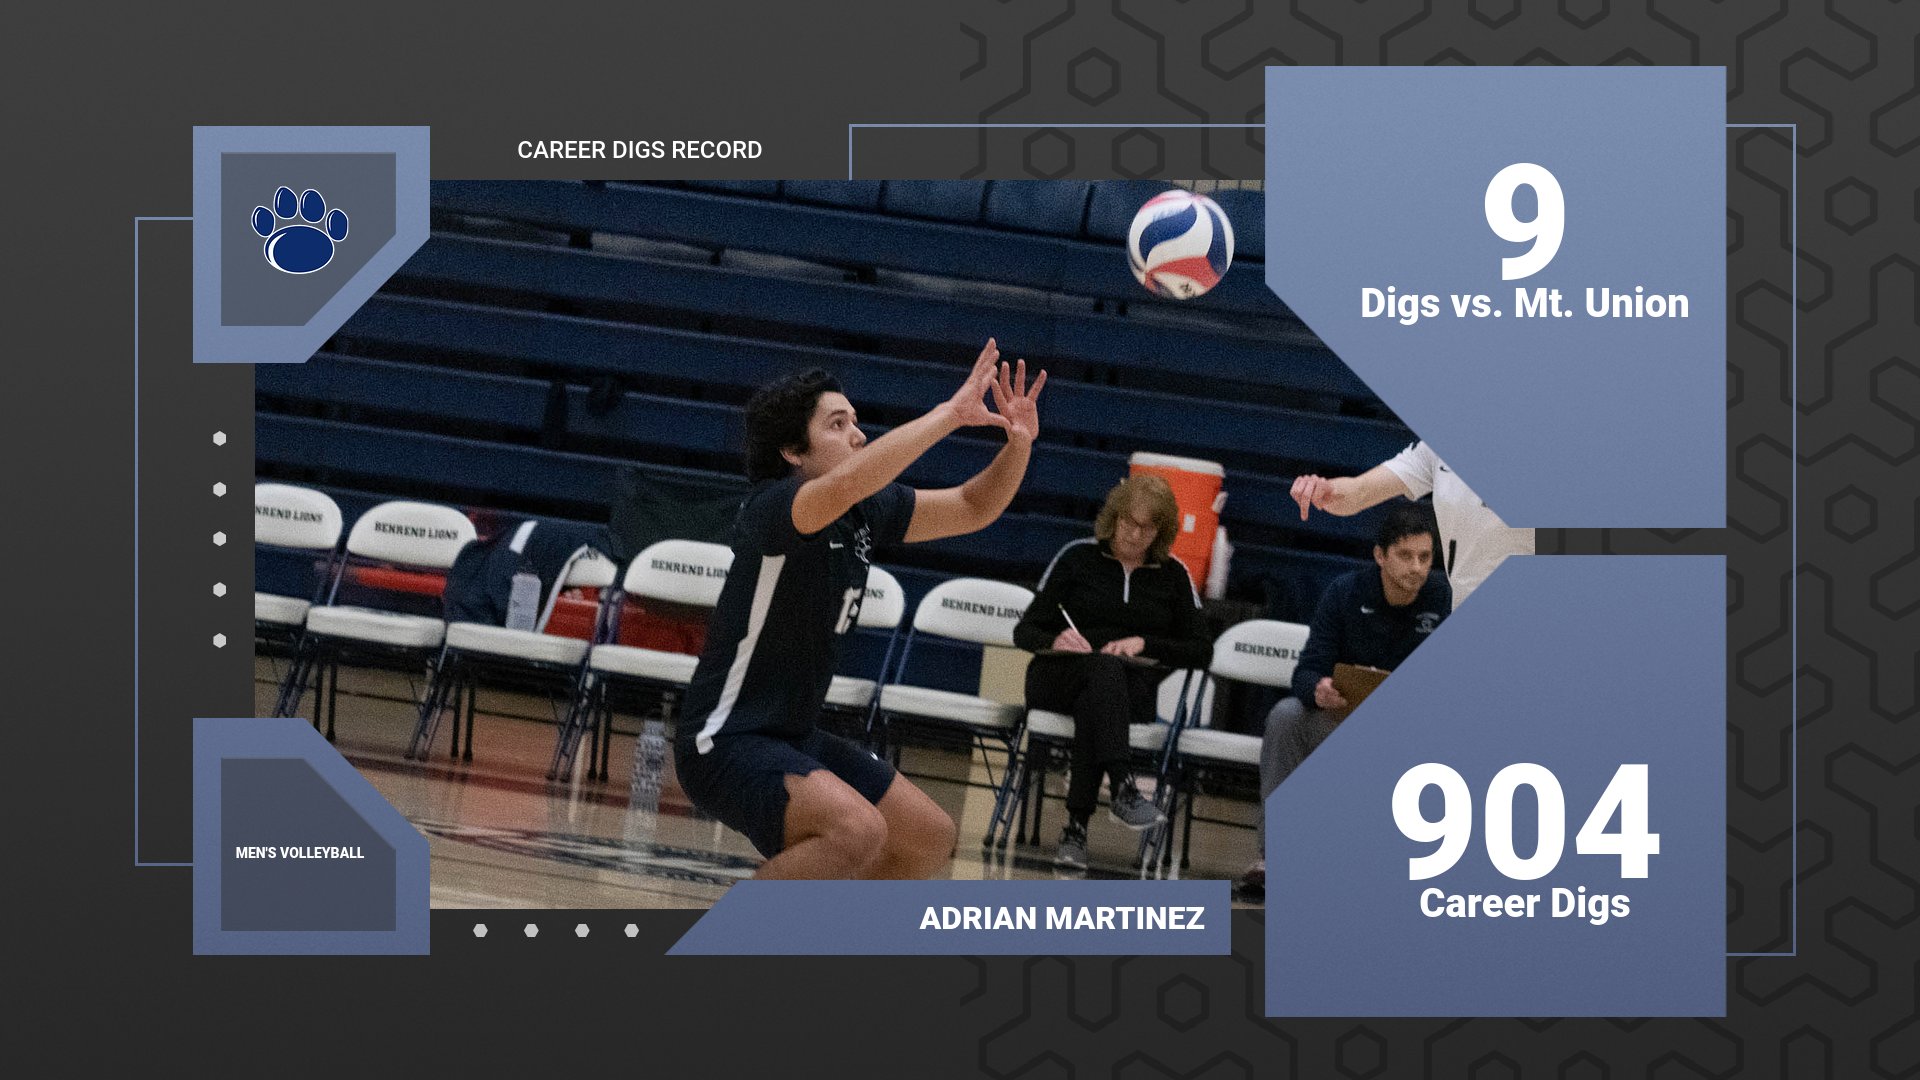 Martinez Breaks Career Digs Record; Men's Volleyball Falls to Mt. Union